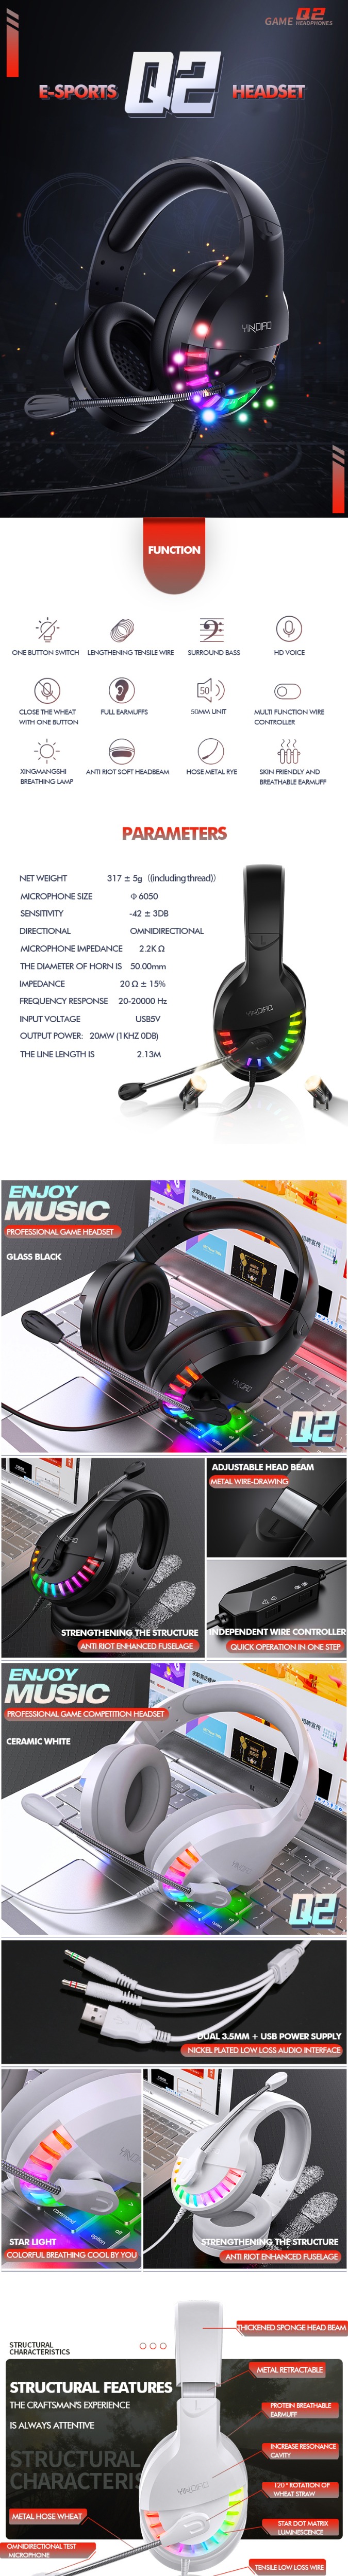 Bakeey-Q2-USB-35mm-AUX-Wired-Gaming-Headset-Over-Ear-Surround-Bass-HD-Voice-Low-Loss-RGB-Light-Headp-1760954-1